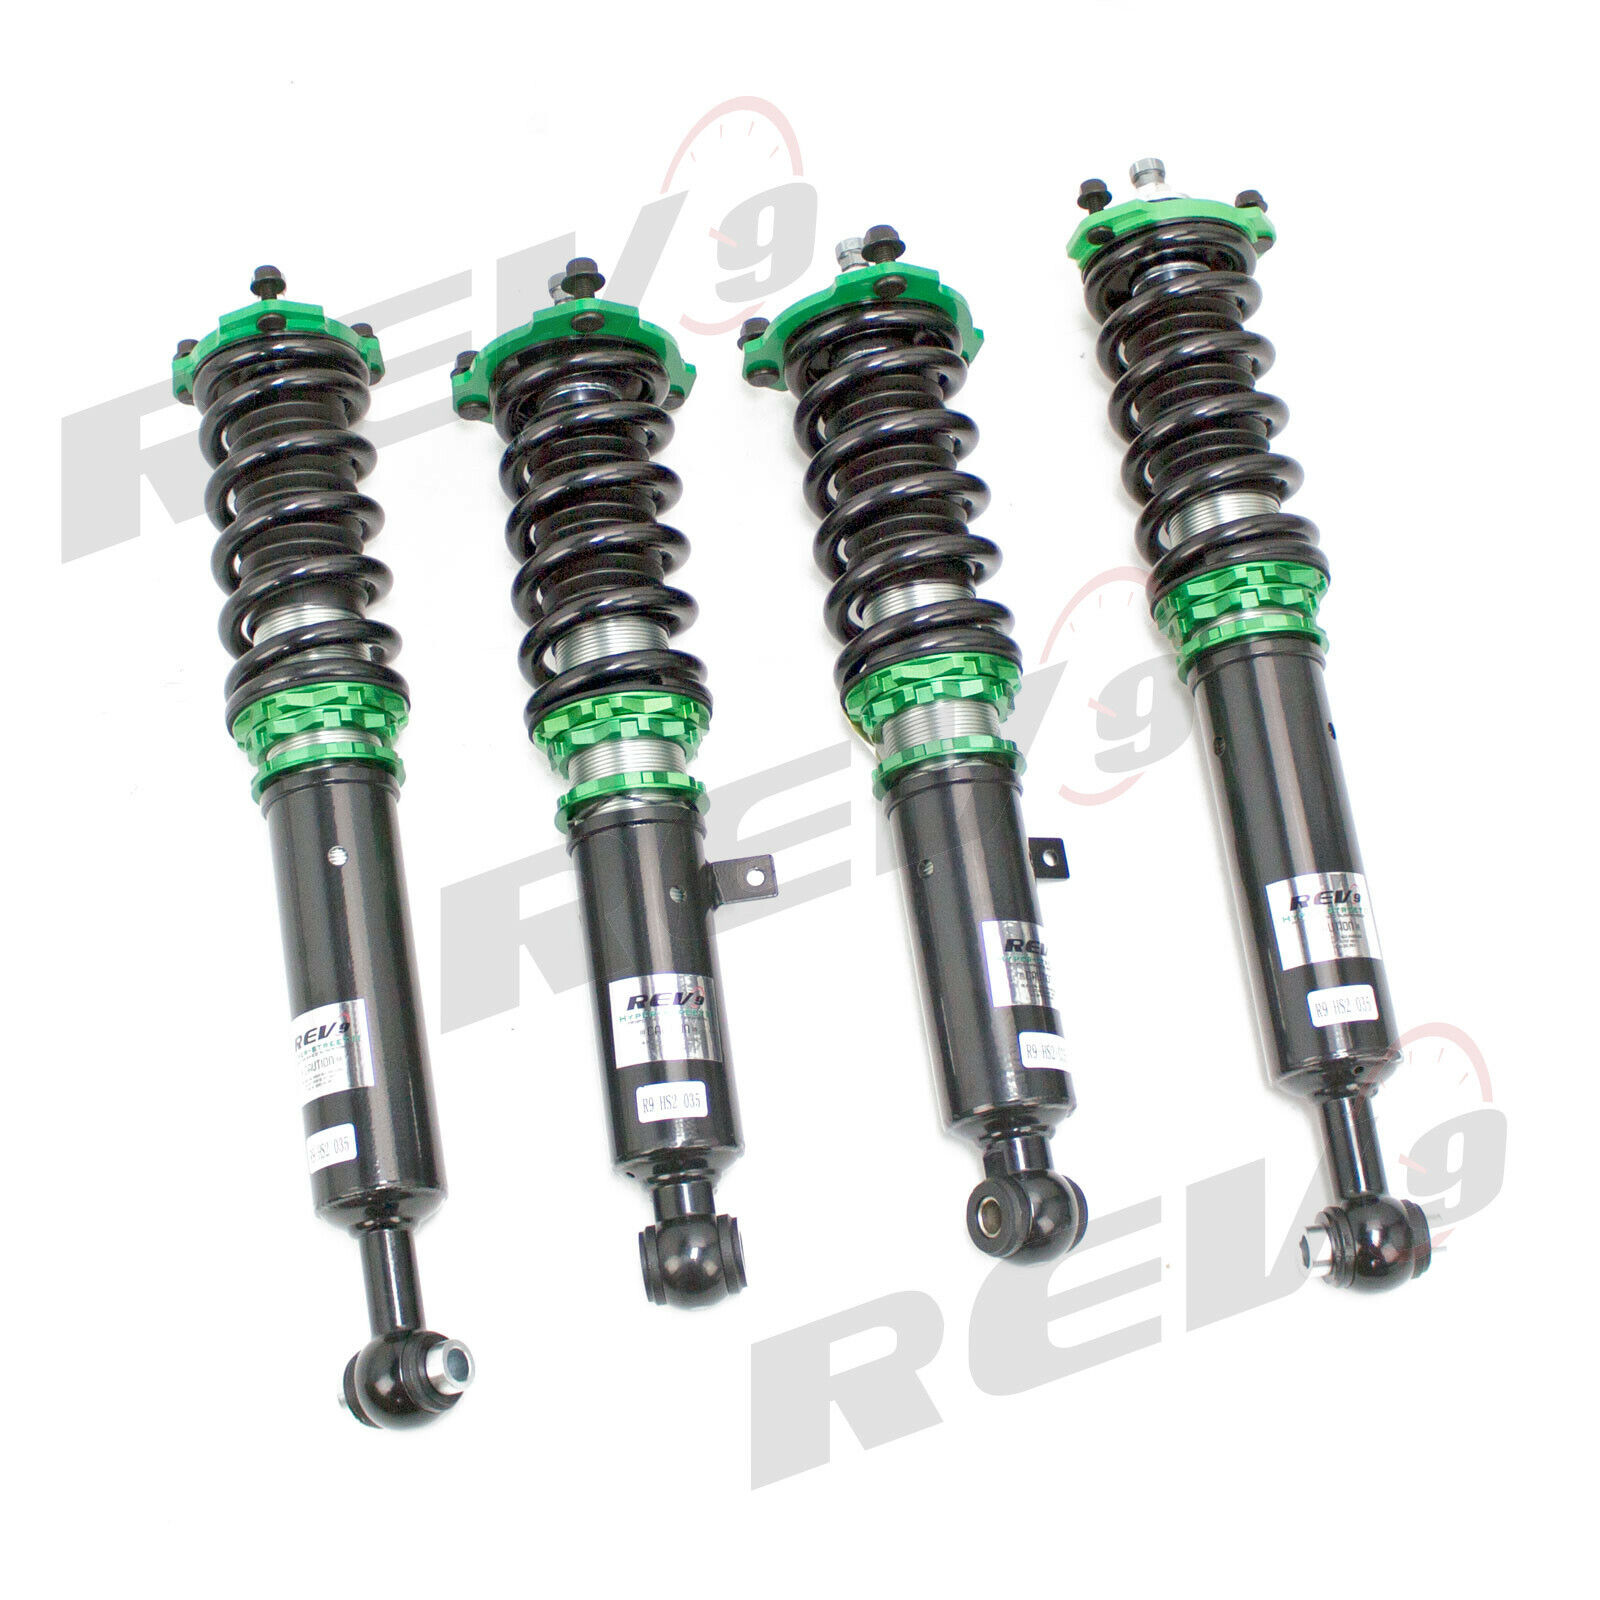 Rev9 Power Hyper Street 2 Coilovers Suspension for Lexus IS250 IS350 RWD 06-13